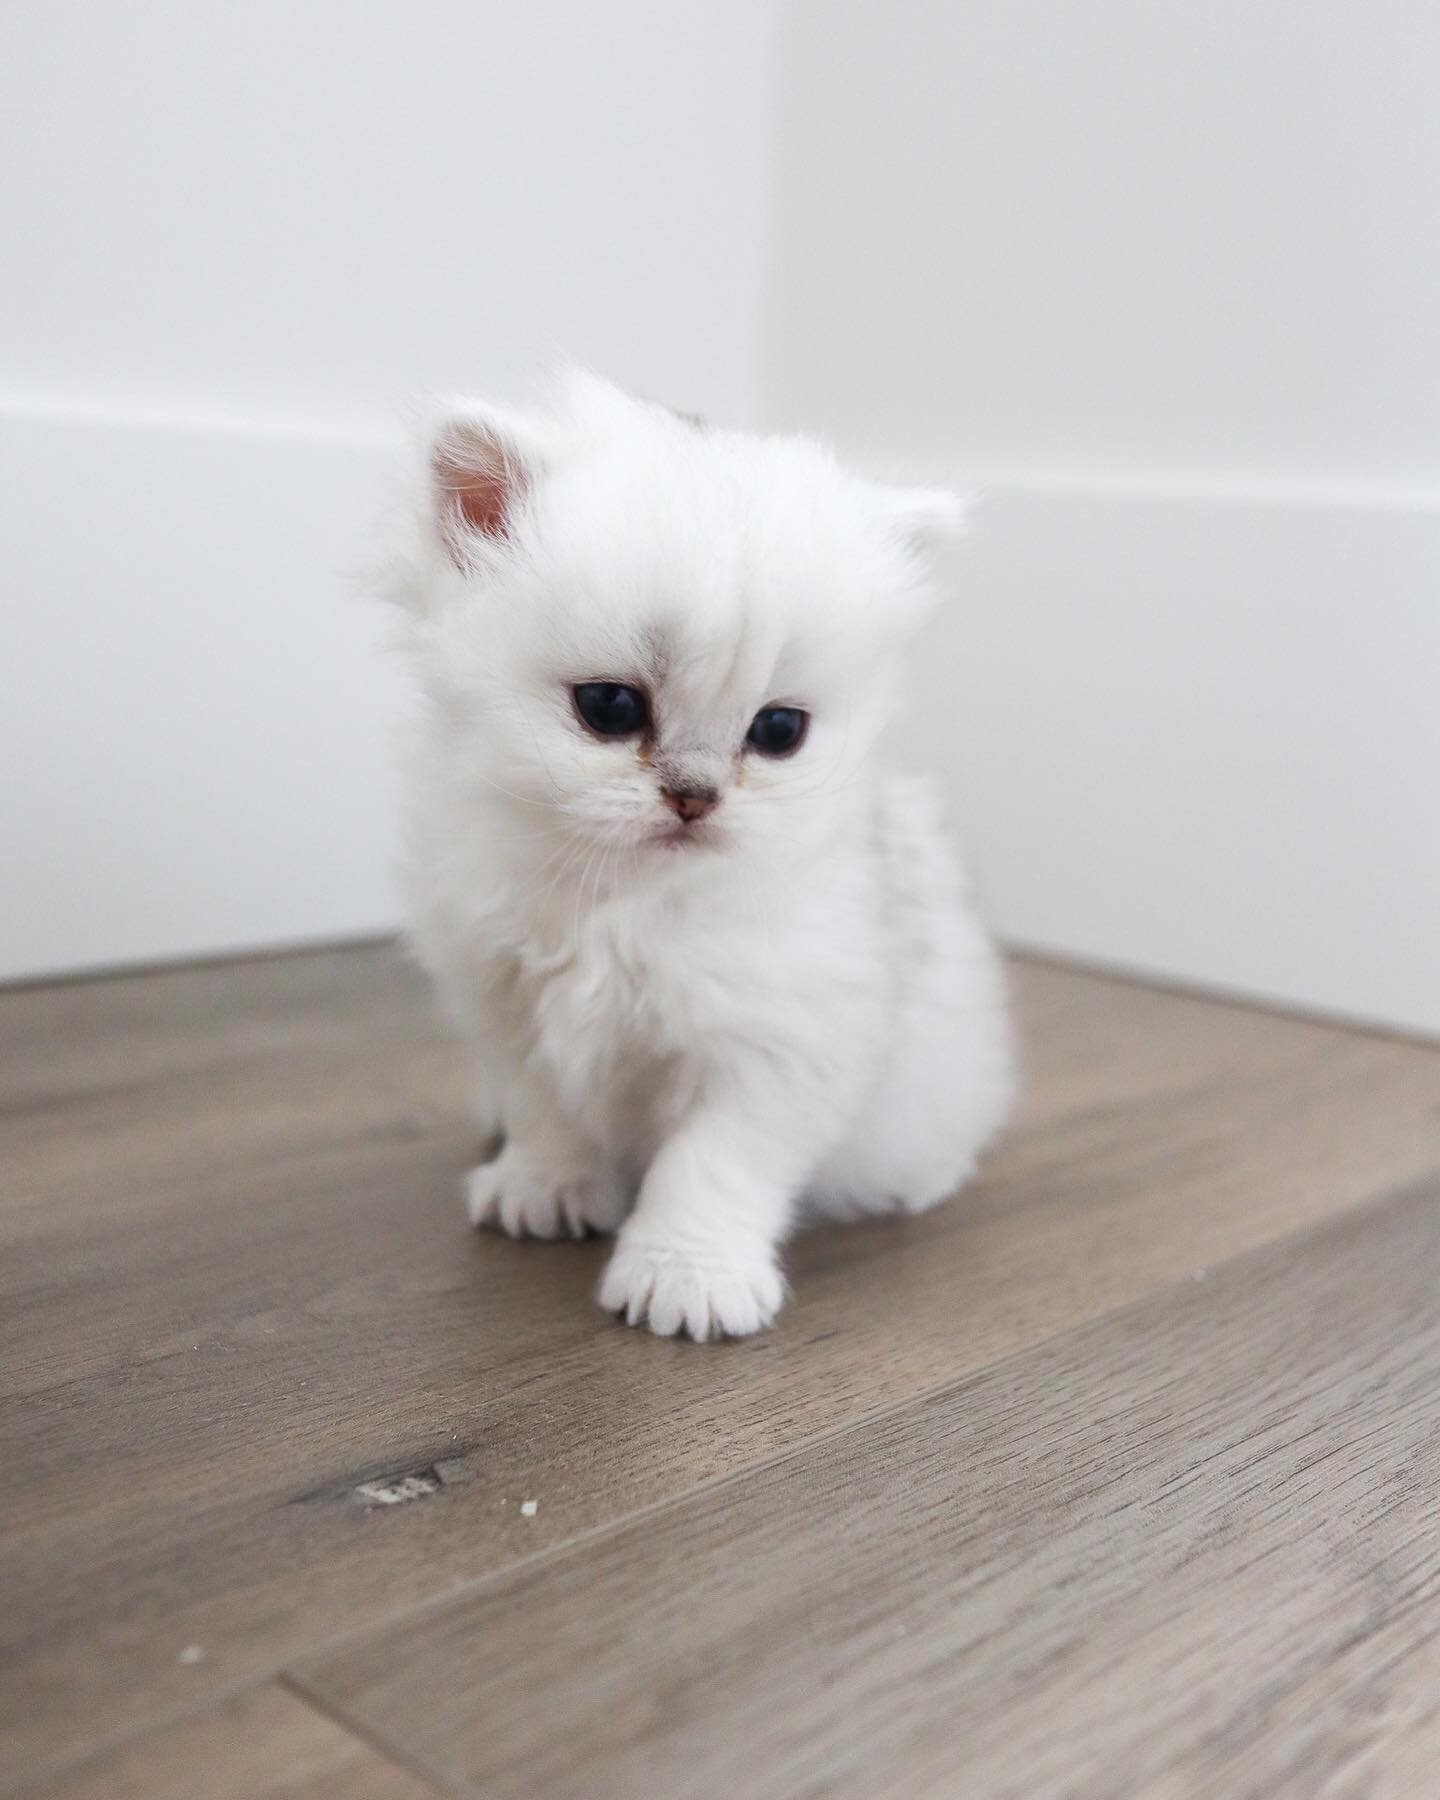 British Longhair is absolutely adorable! 

#britishlonghair #britishlonghairkitten #blhkitten #kitten #catoftheday #vancouver #vancouverbreeder